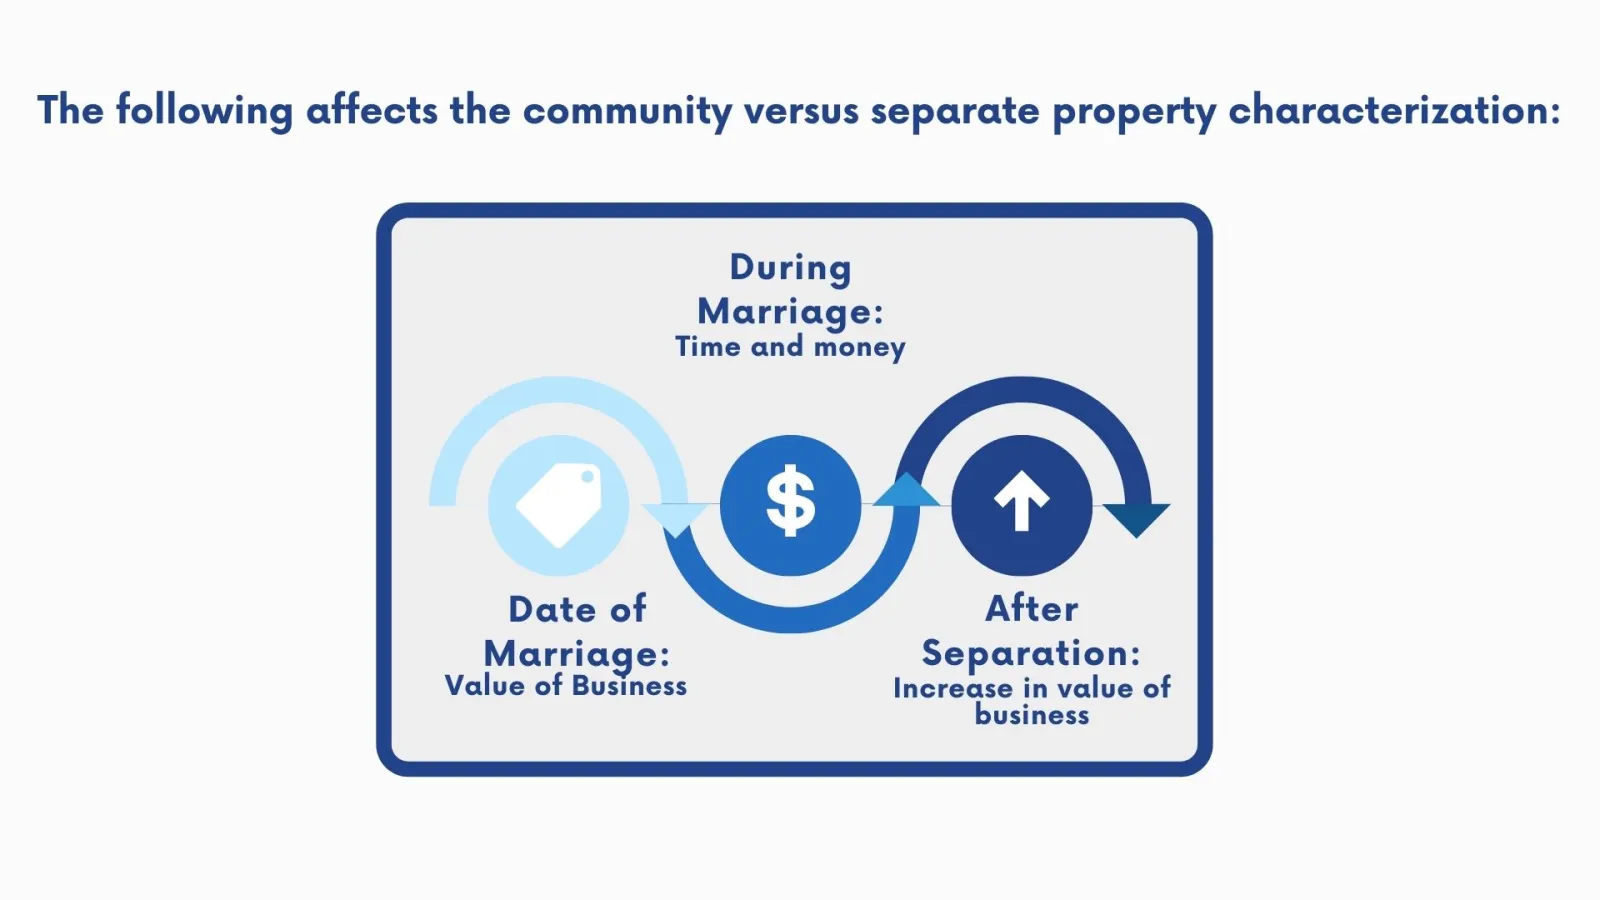 Chart of characterizing community or separate property of business